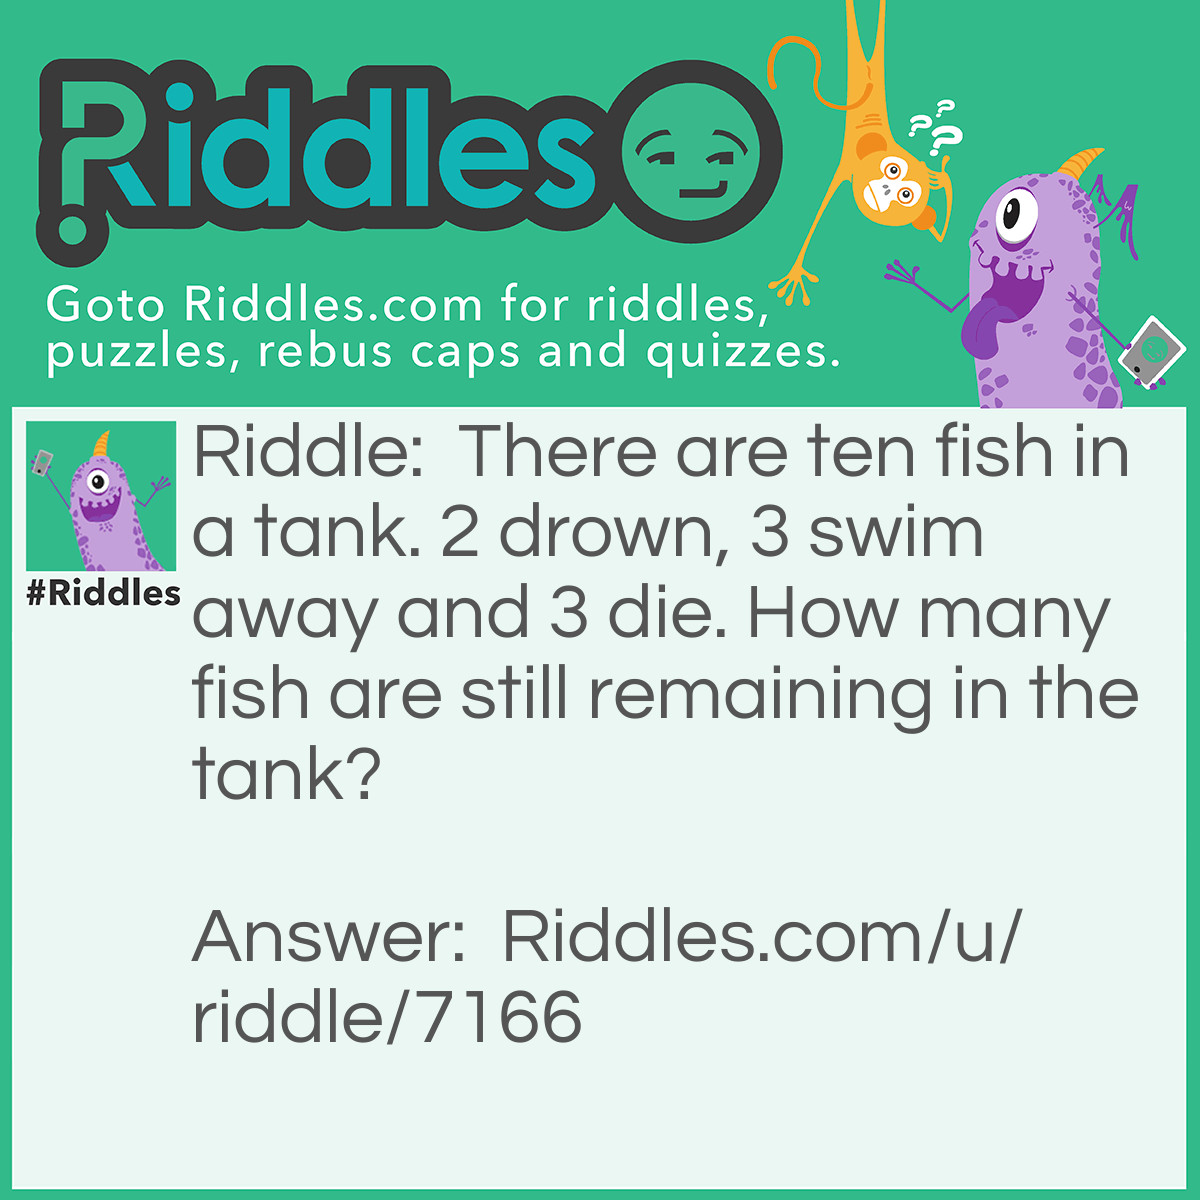 Riddle: There are ten fish in a tank. 2 drown, 3 swim away and 3 die. How many fish are still remaining in the tank? Answer: Seven. Fish can't drown! They can't swim away if they are in the tank!